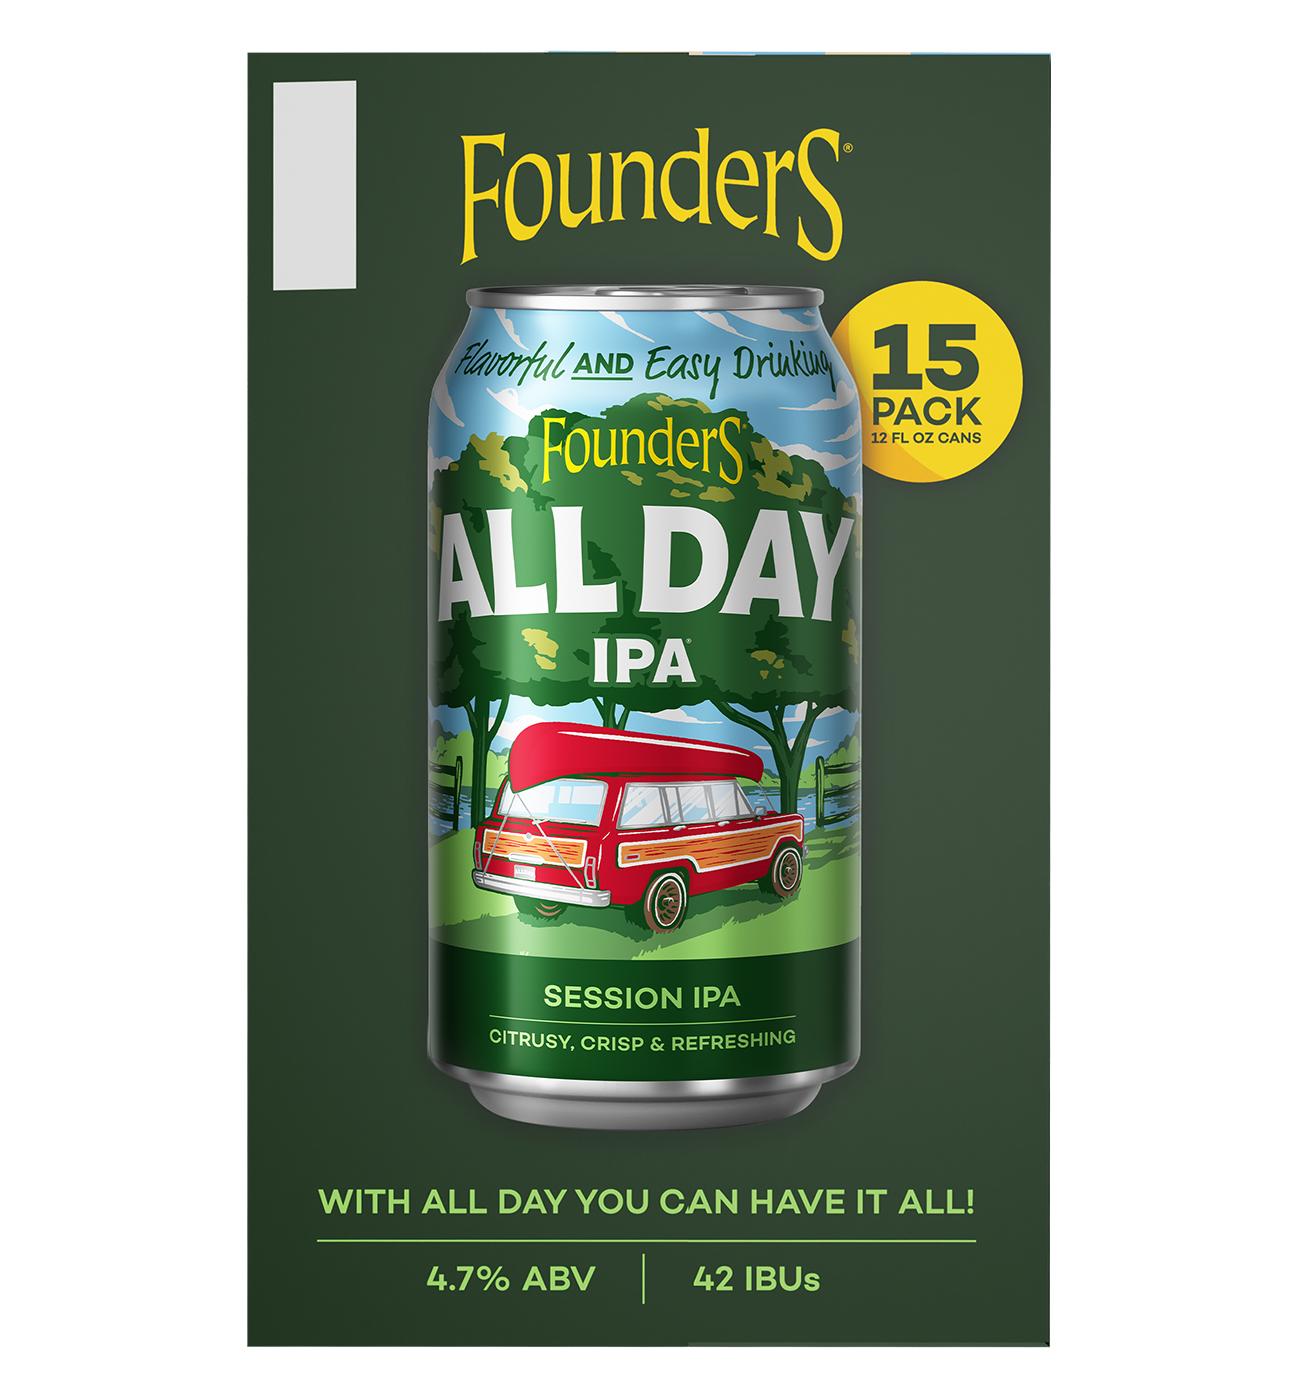 Founders All Day Indian Pale Ale Beer 15 pk Cans; image 3 of 4